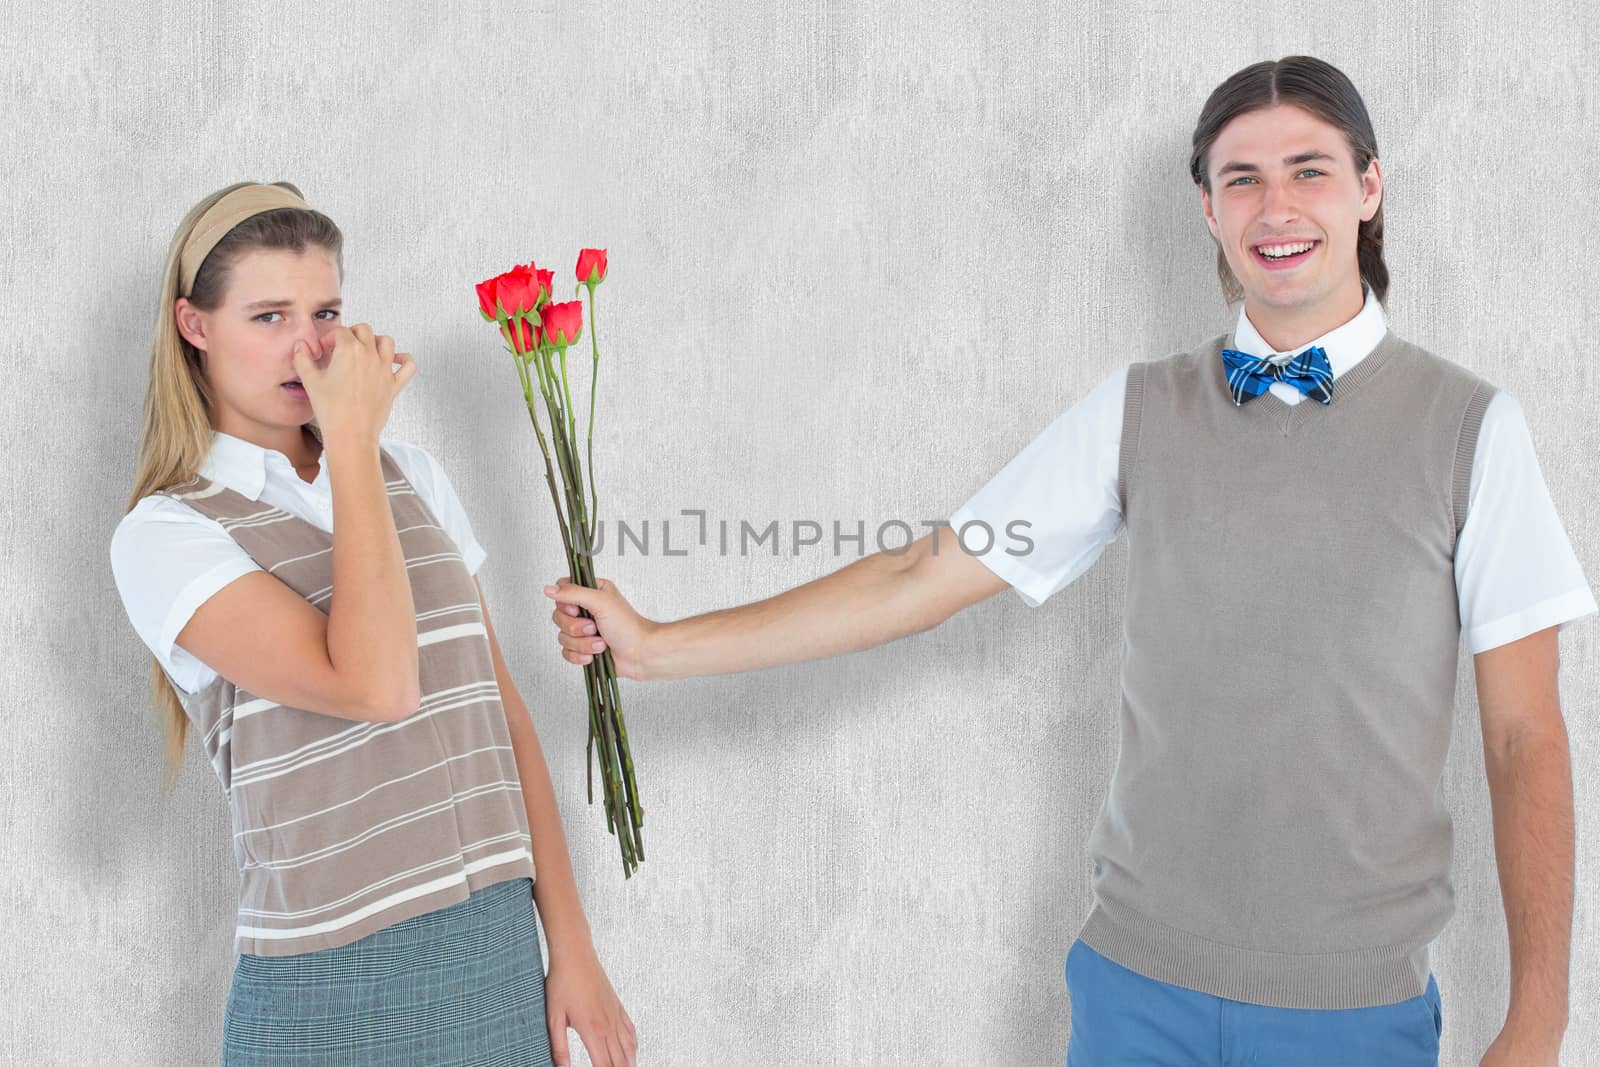 Geeky hipster offering red roses to his girlfriend  against white background